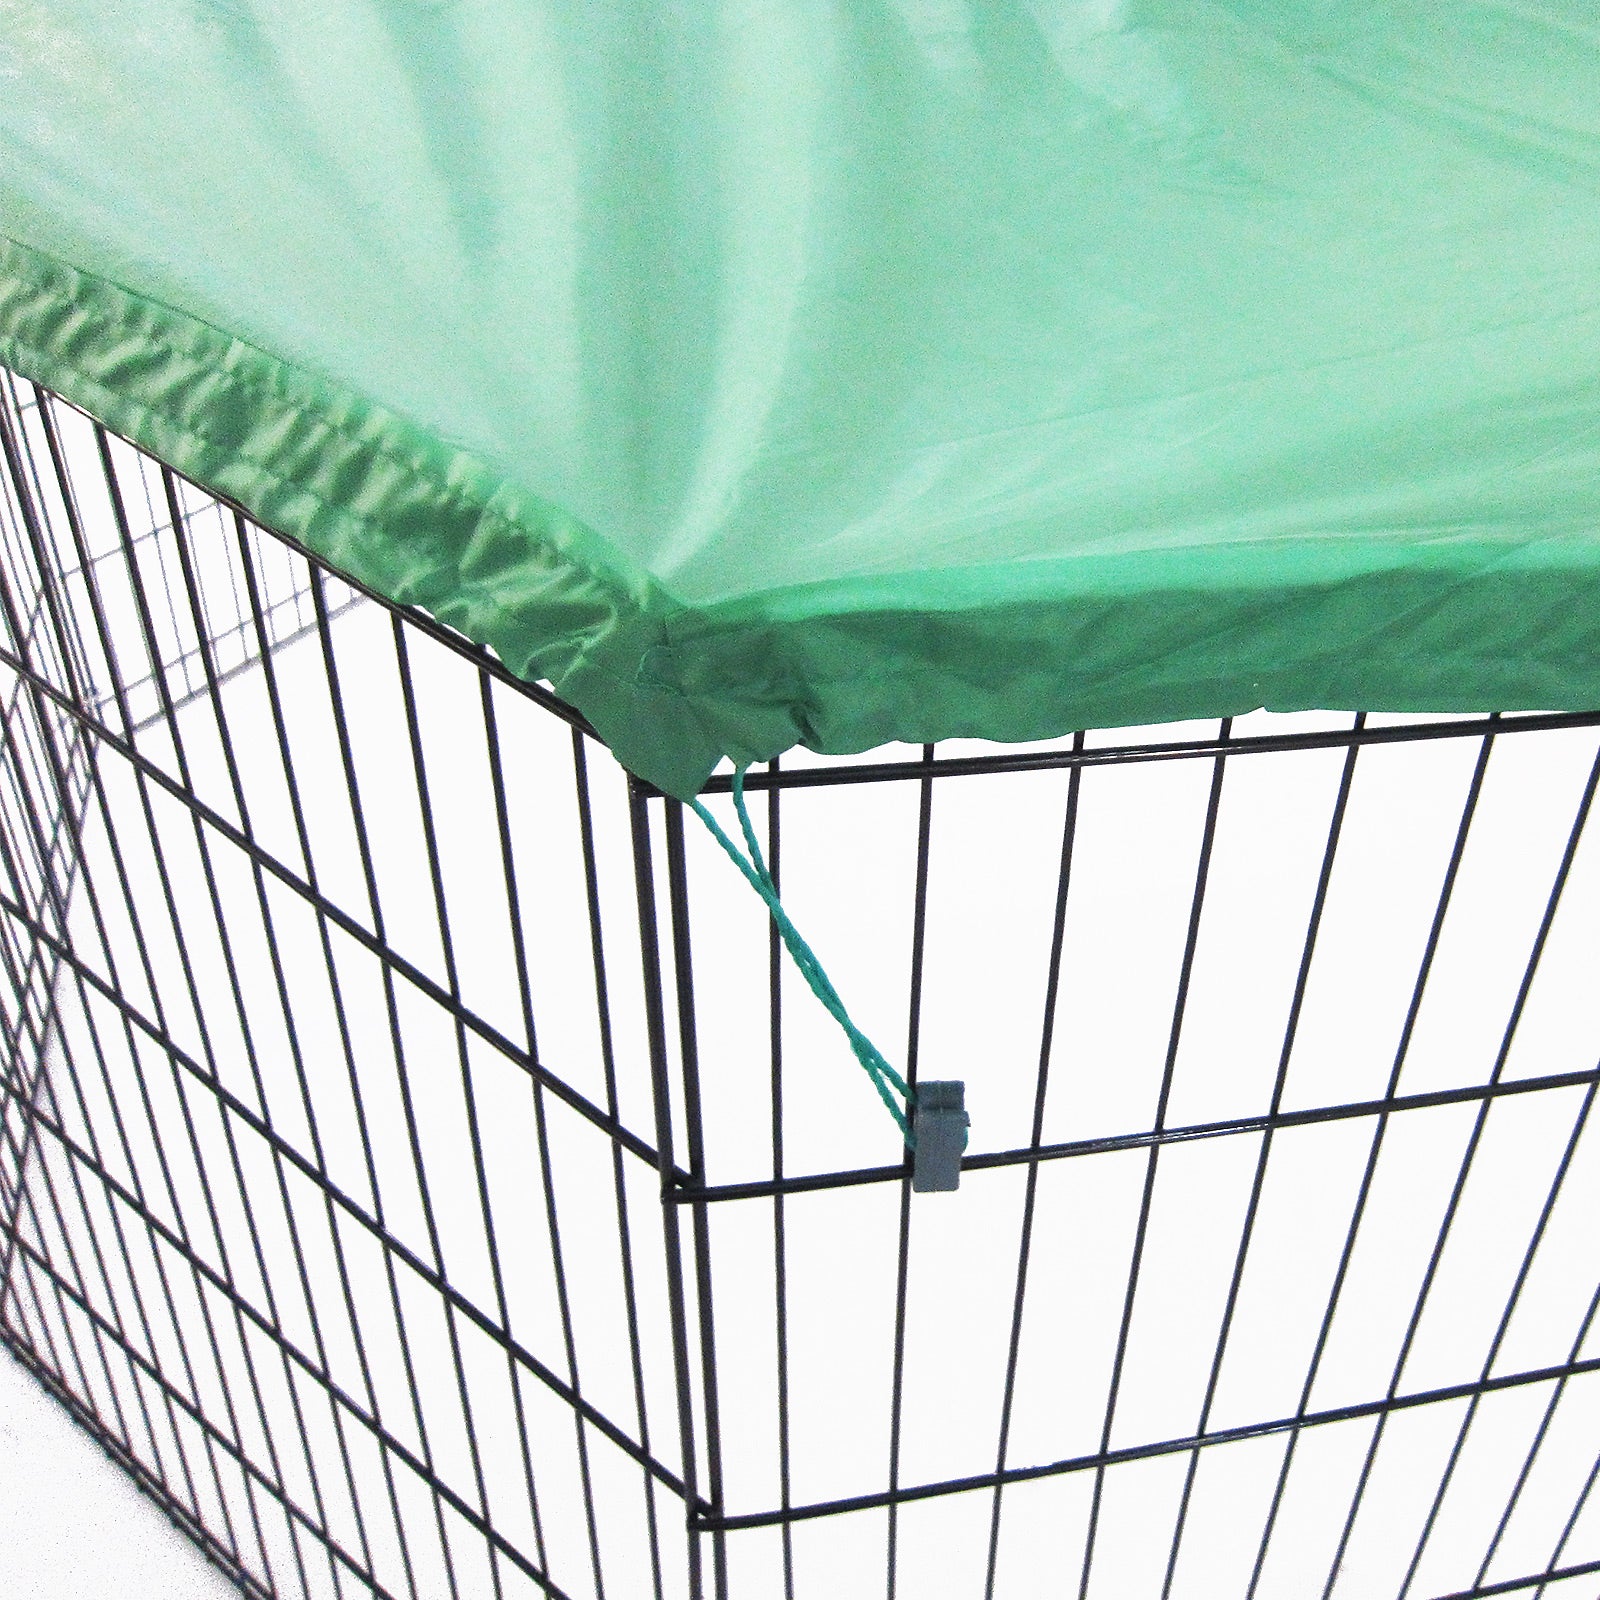 Paw Mate Green Net Cover for Pet Playpen 36in Dog Exercise Enclosure Fence Cage